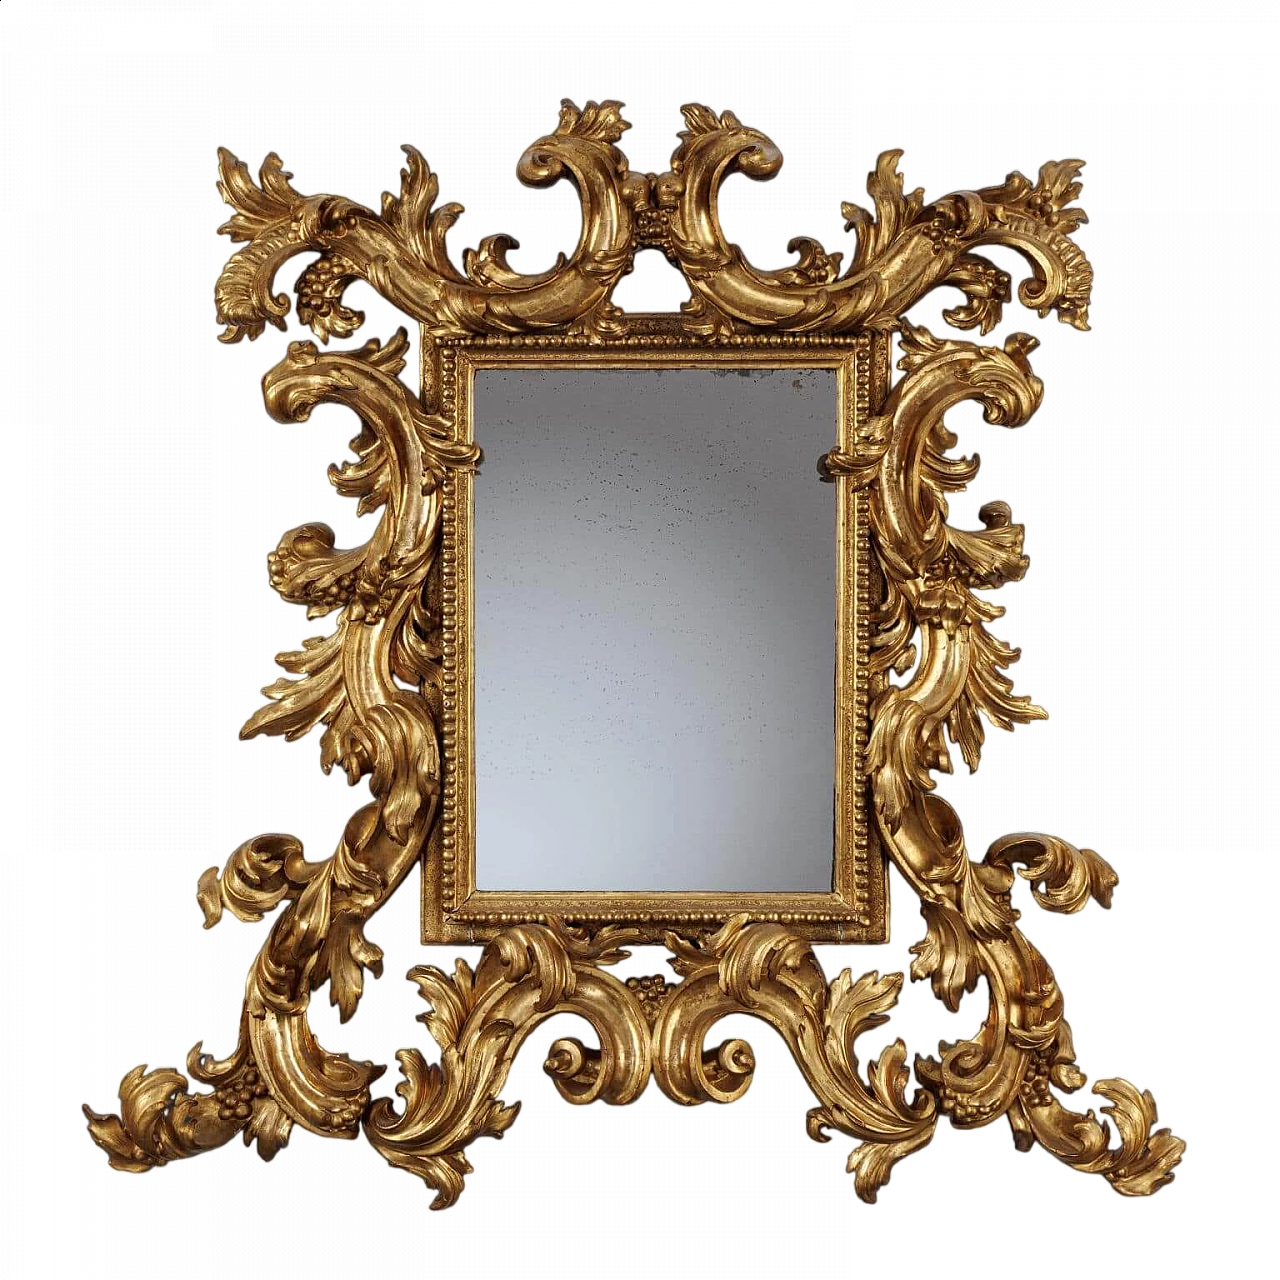 Carved and gilded mirrorboard, early 18th century 8